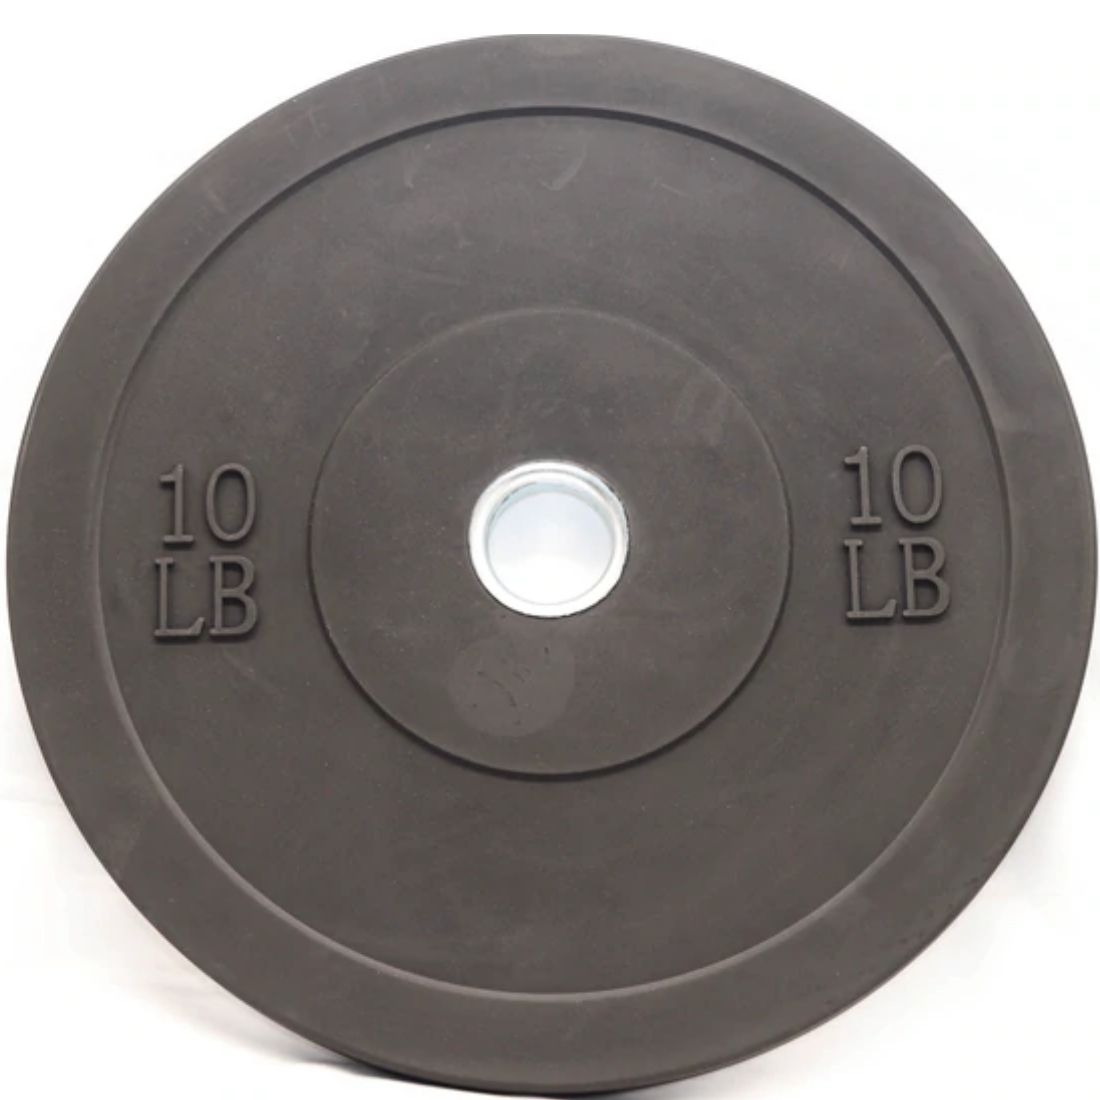 Fit It Out LBS Bumper Plate